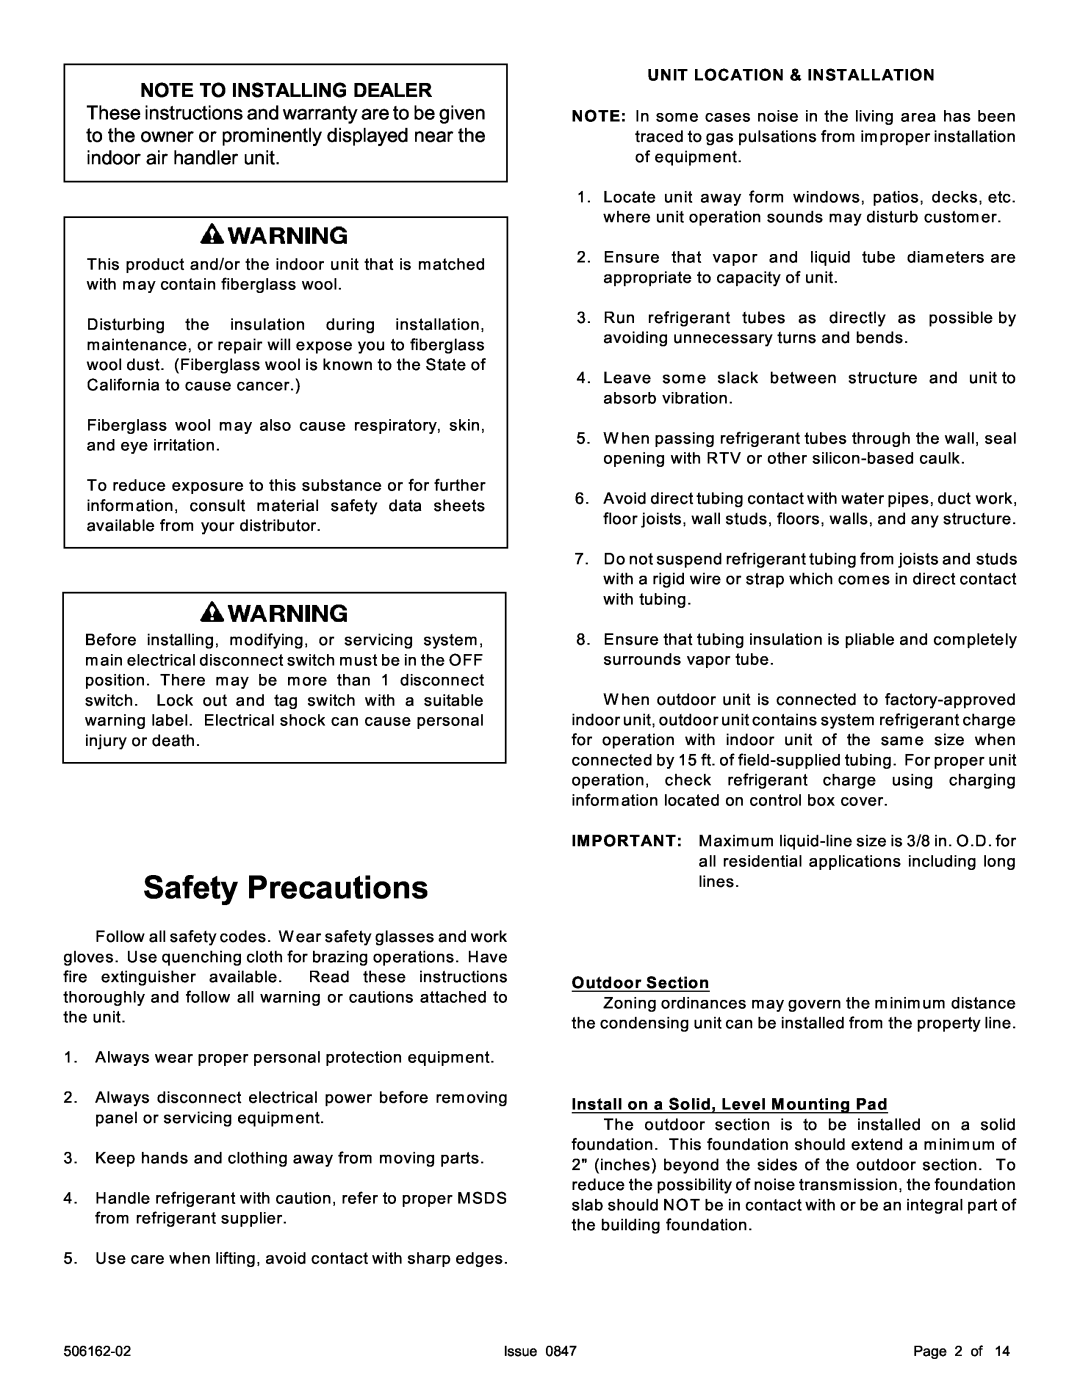 Ducane (HVAC) 2HP13/14 Safety Precautions, Note To Installing Dealer, These instructions and warranty are to be given 